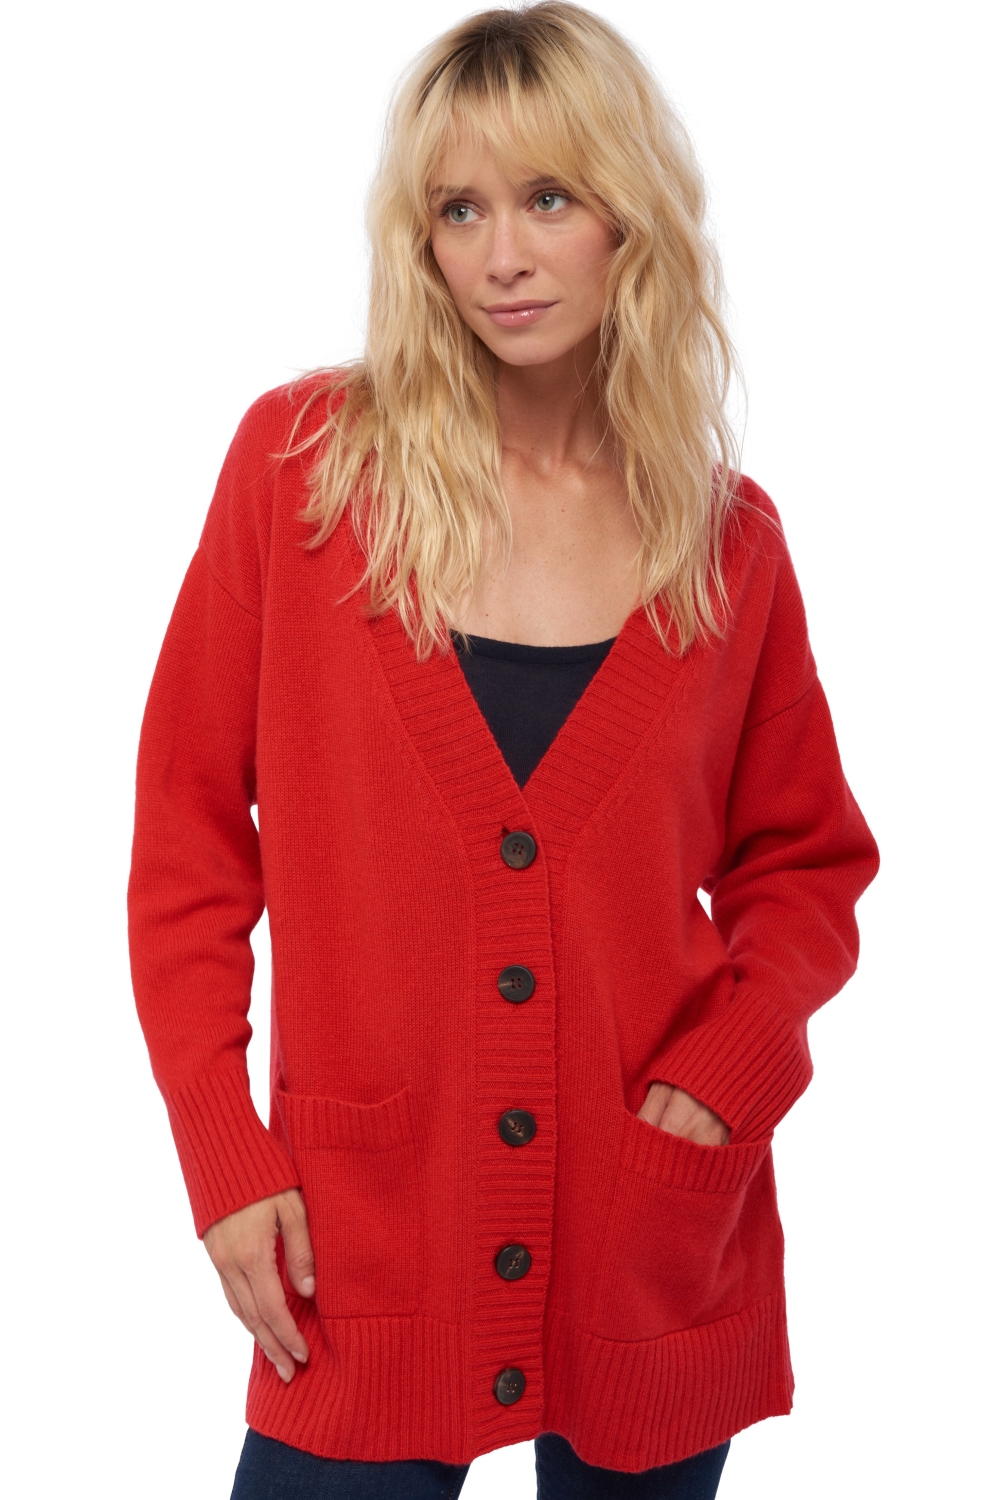 Cashmere ladies chunky sweater vadena rouge 2xl